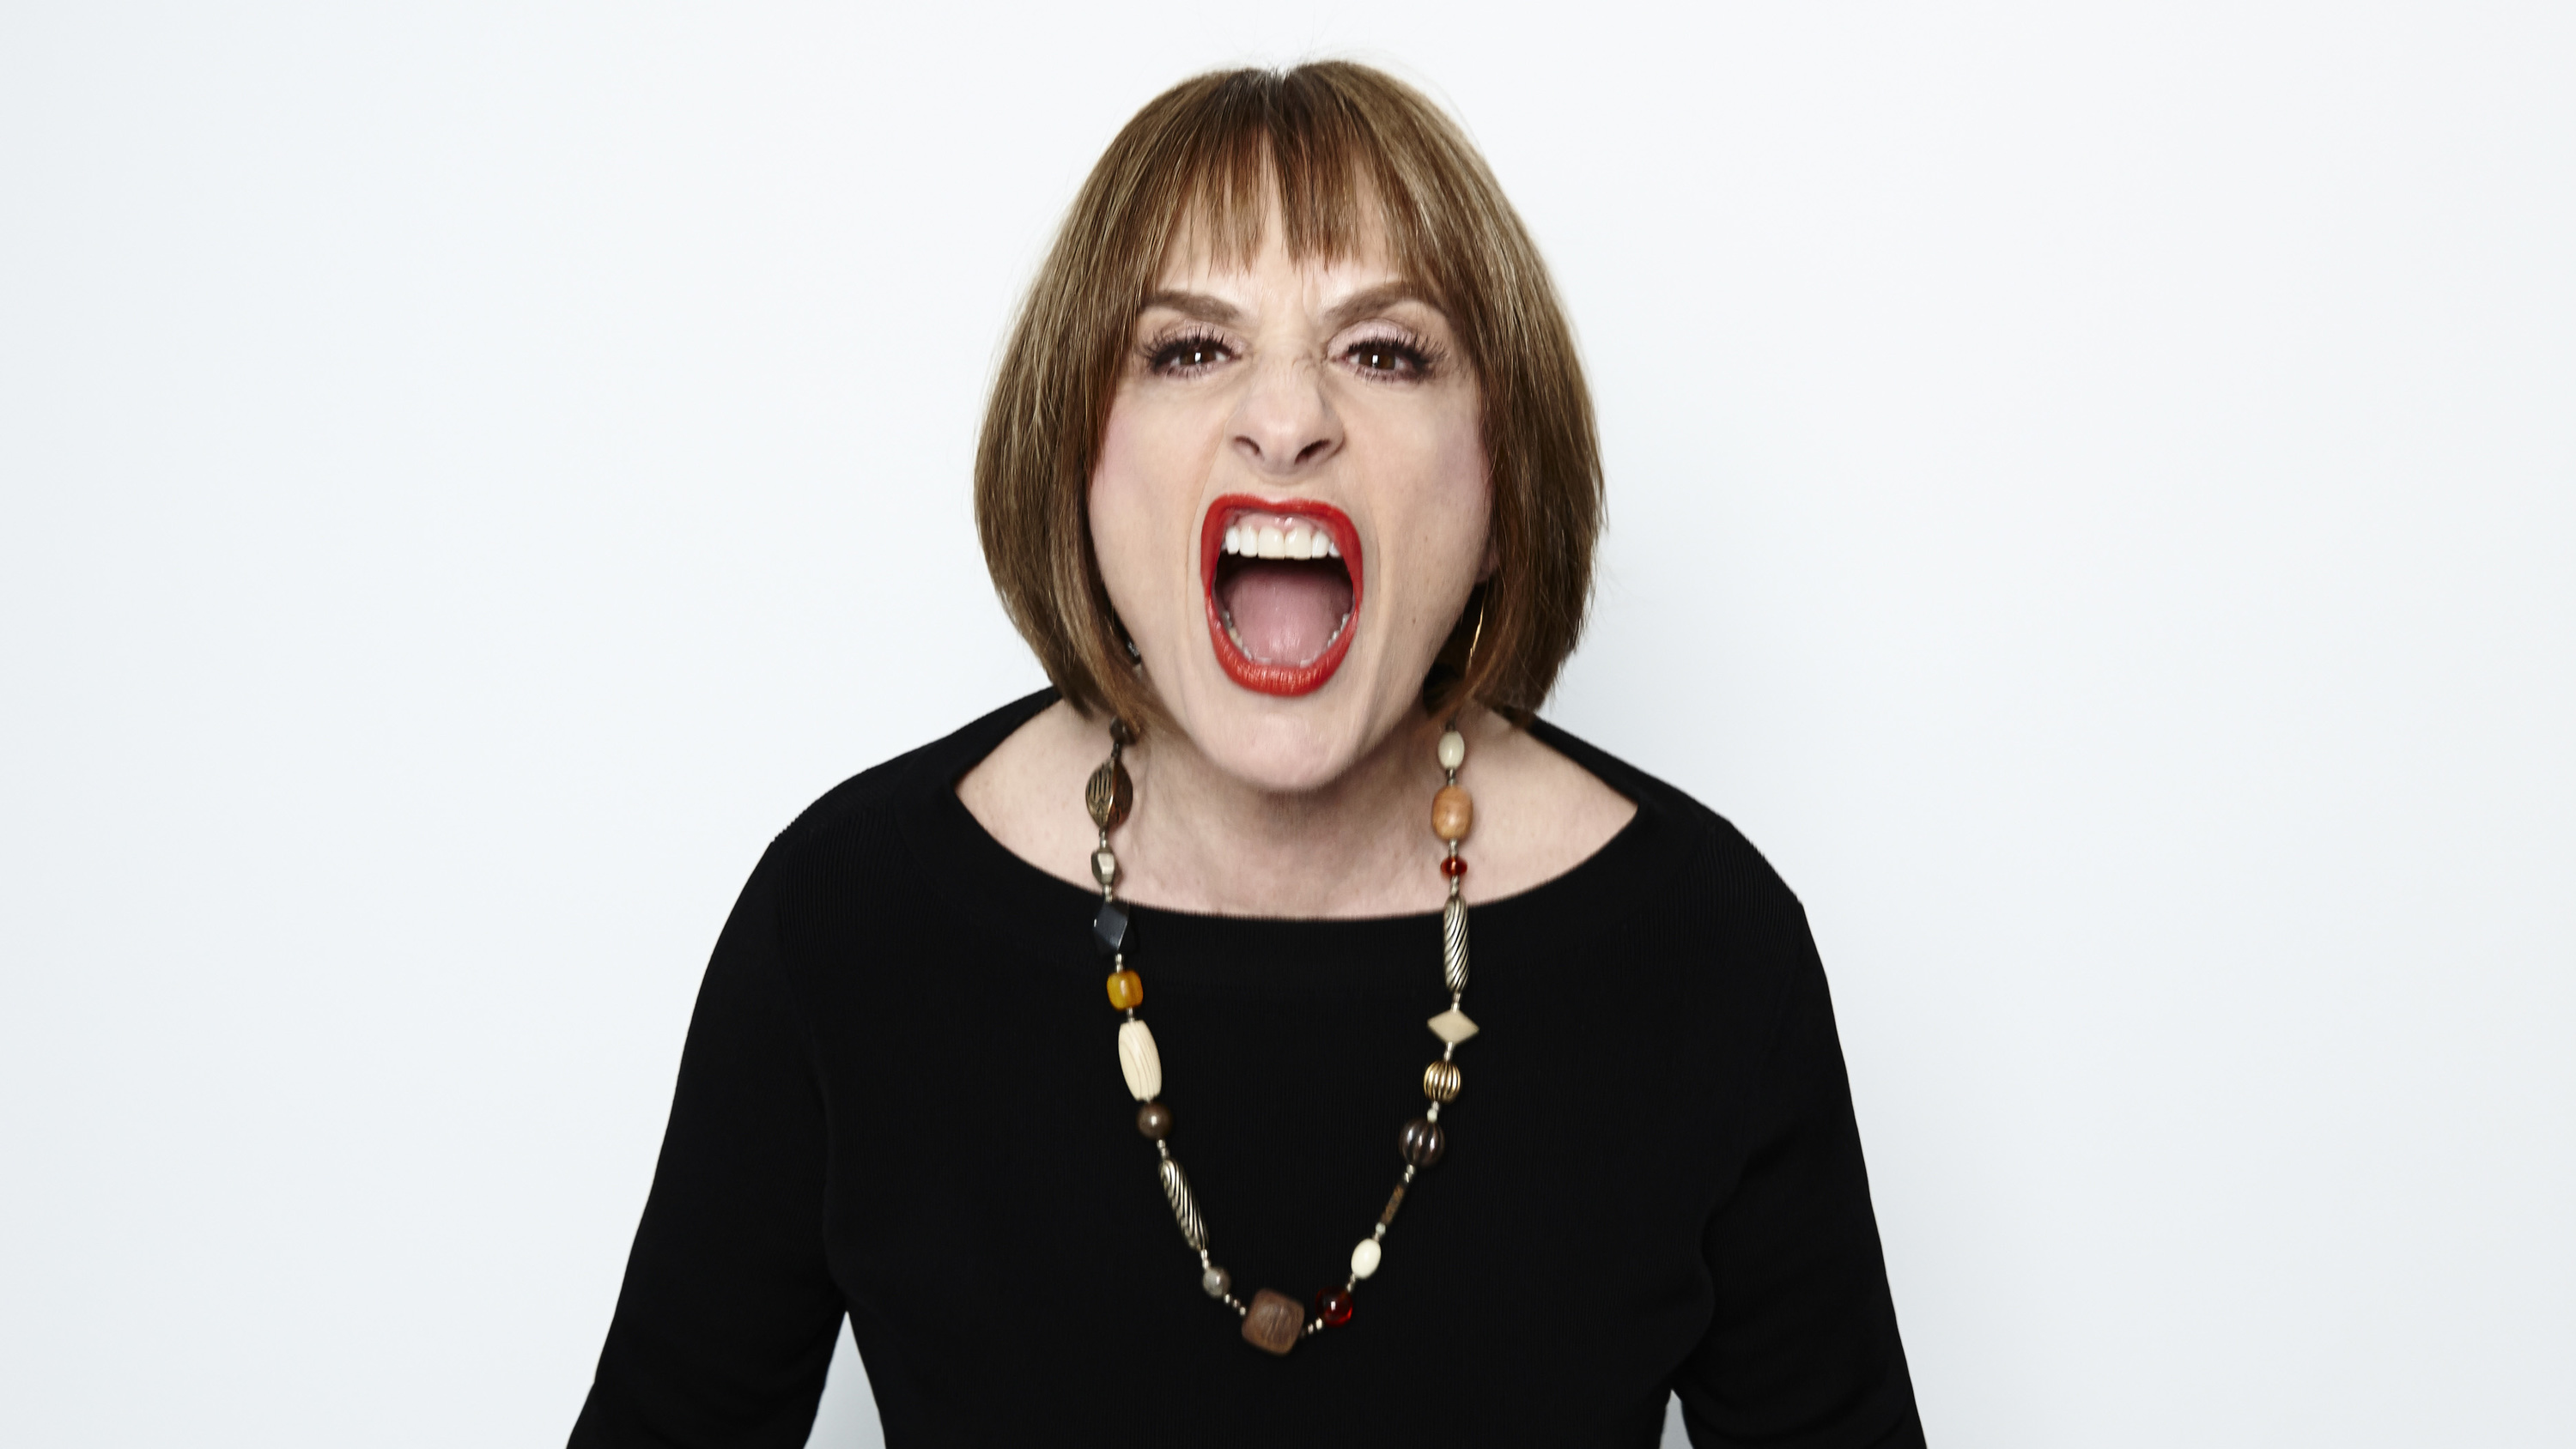 More Pictures Of Patti LuPone. 